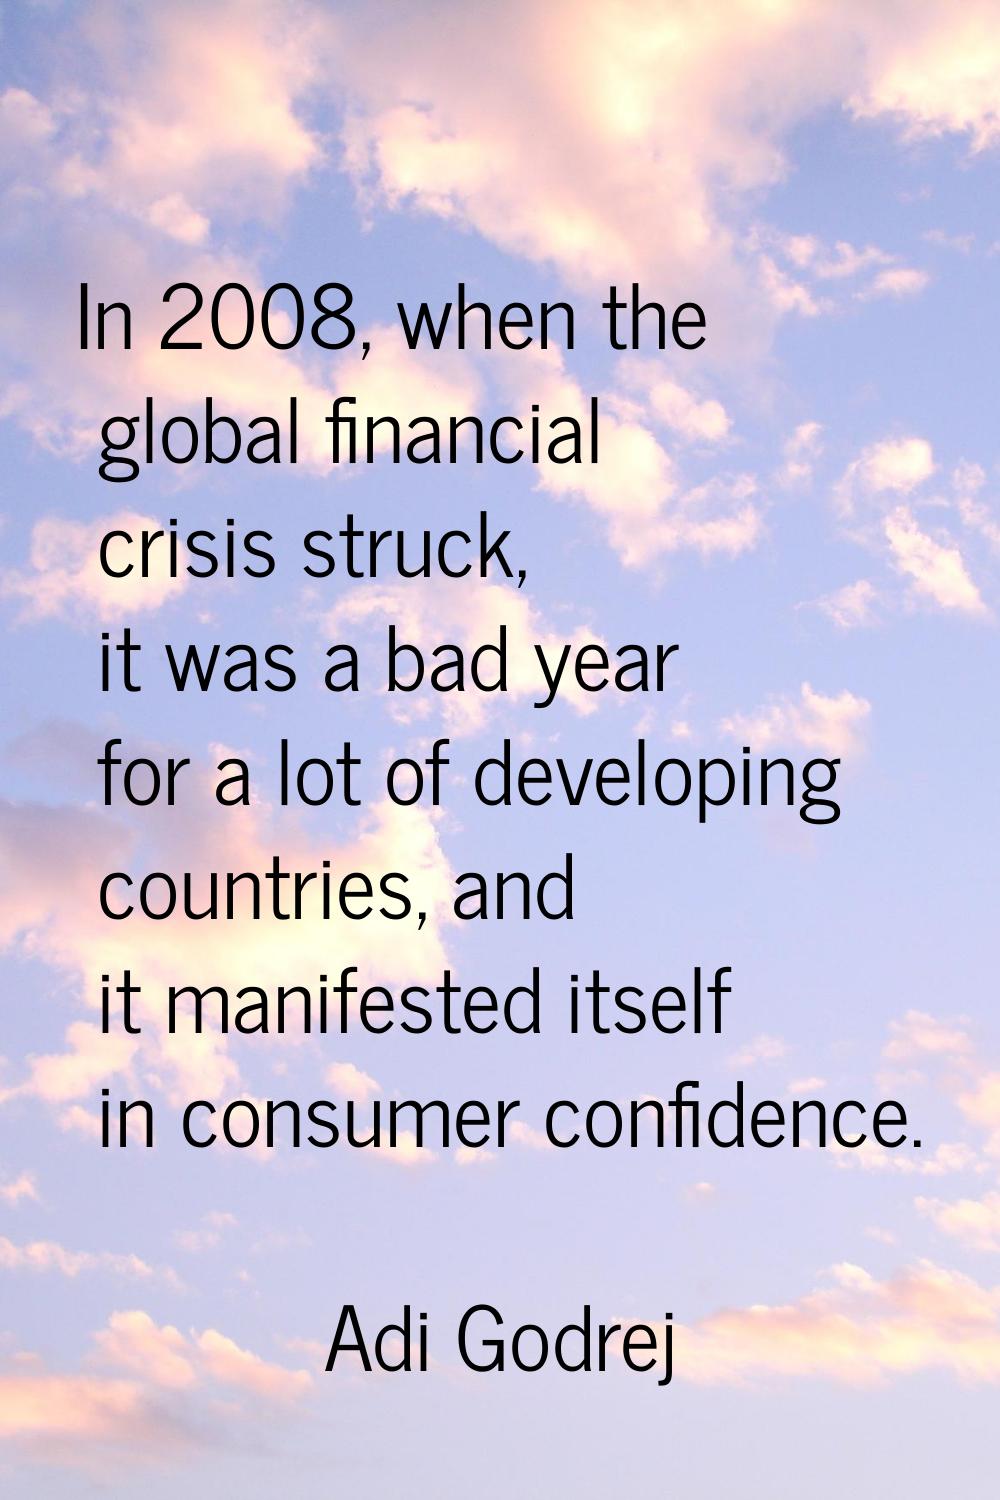 In 2008, when the global financial crisis struck, it was a bad year for a lot of developing countri